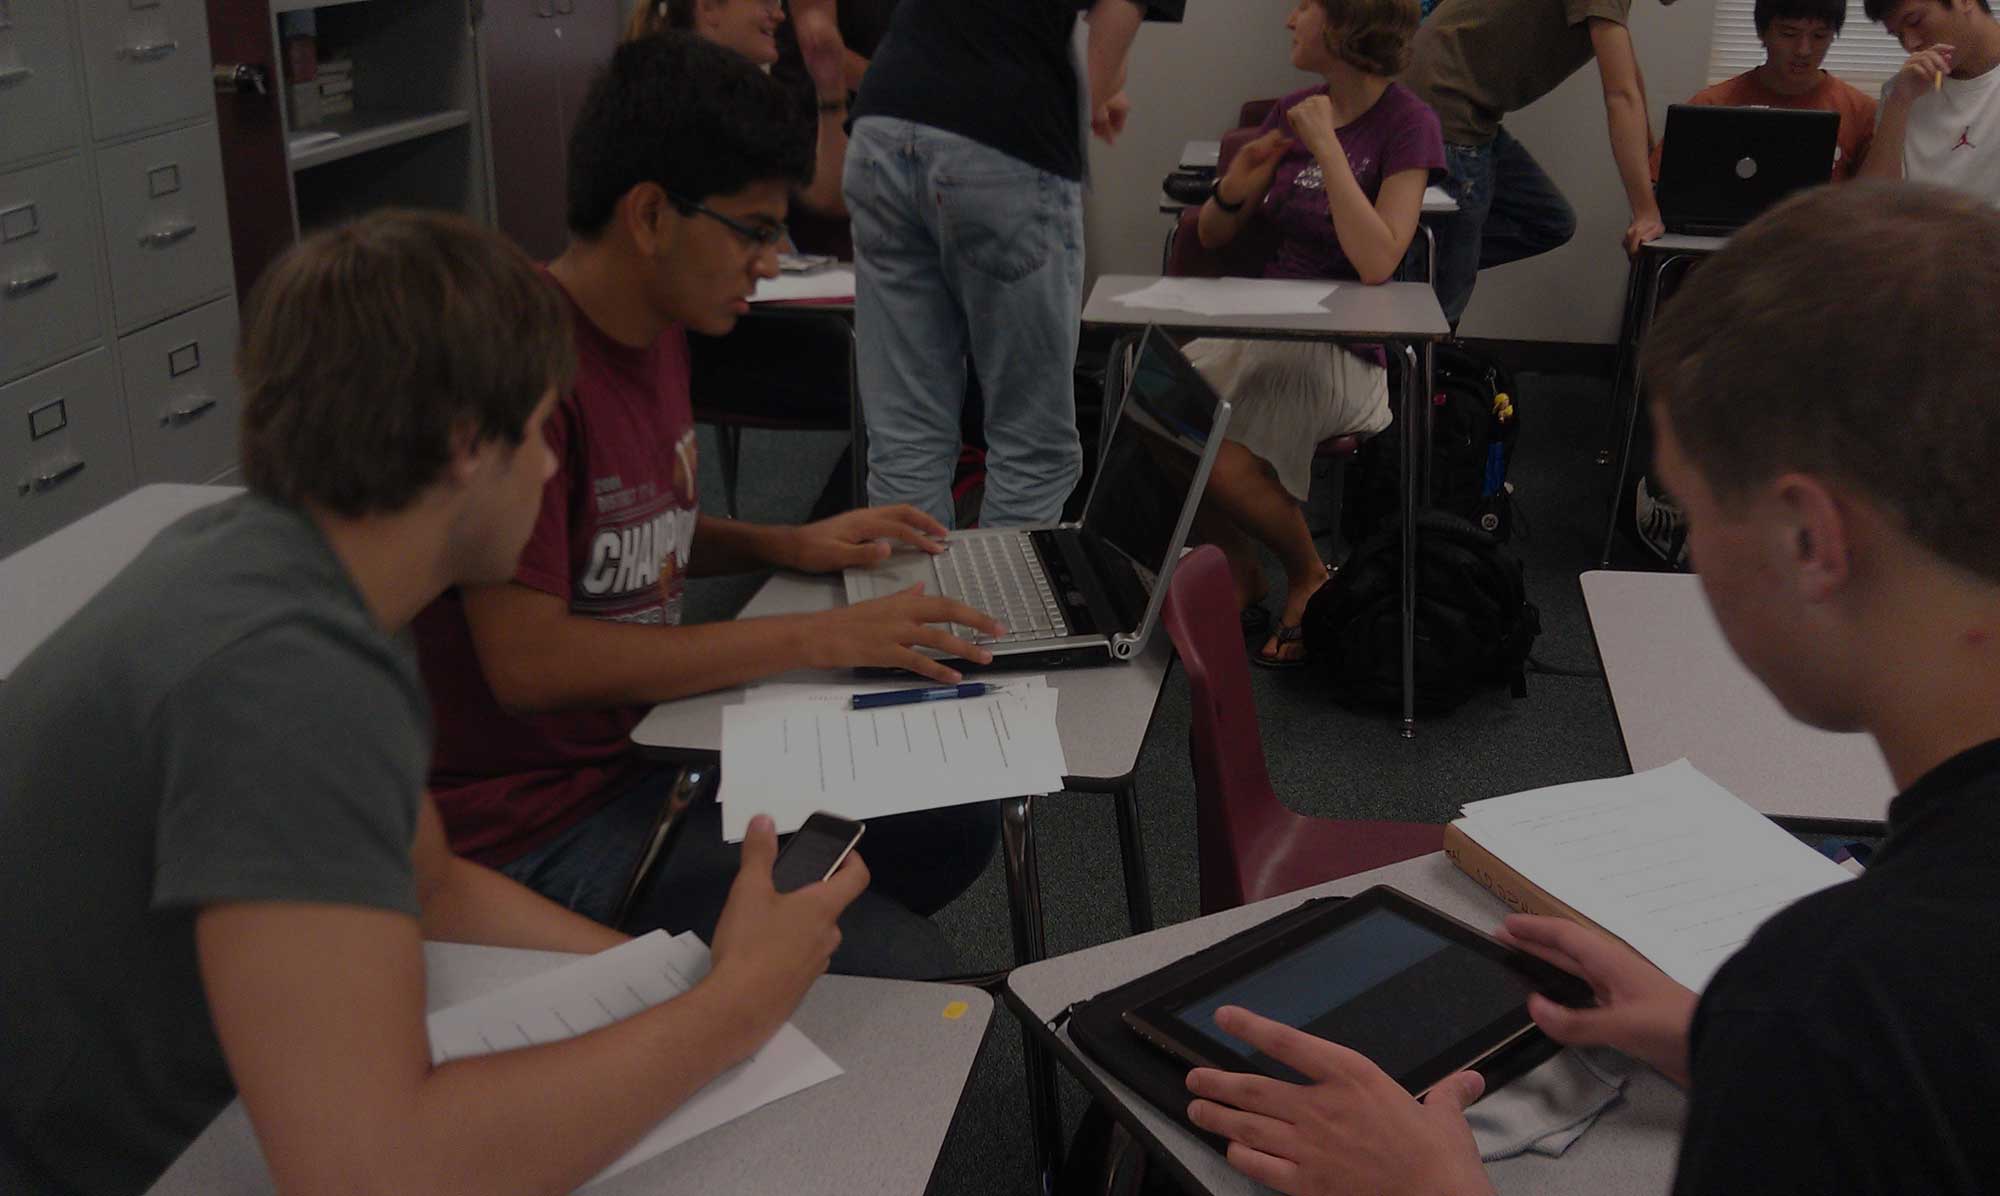 High School students using multiple byod devices for learning in the classroom